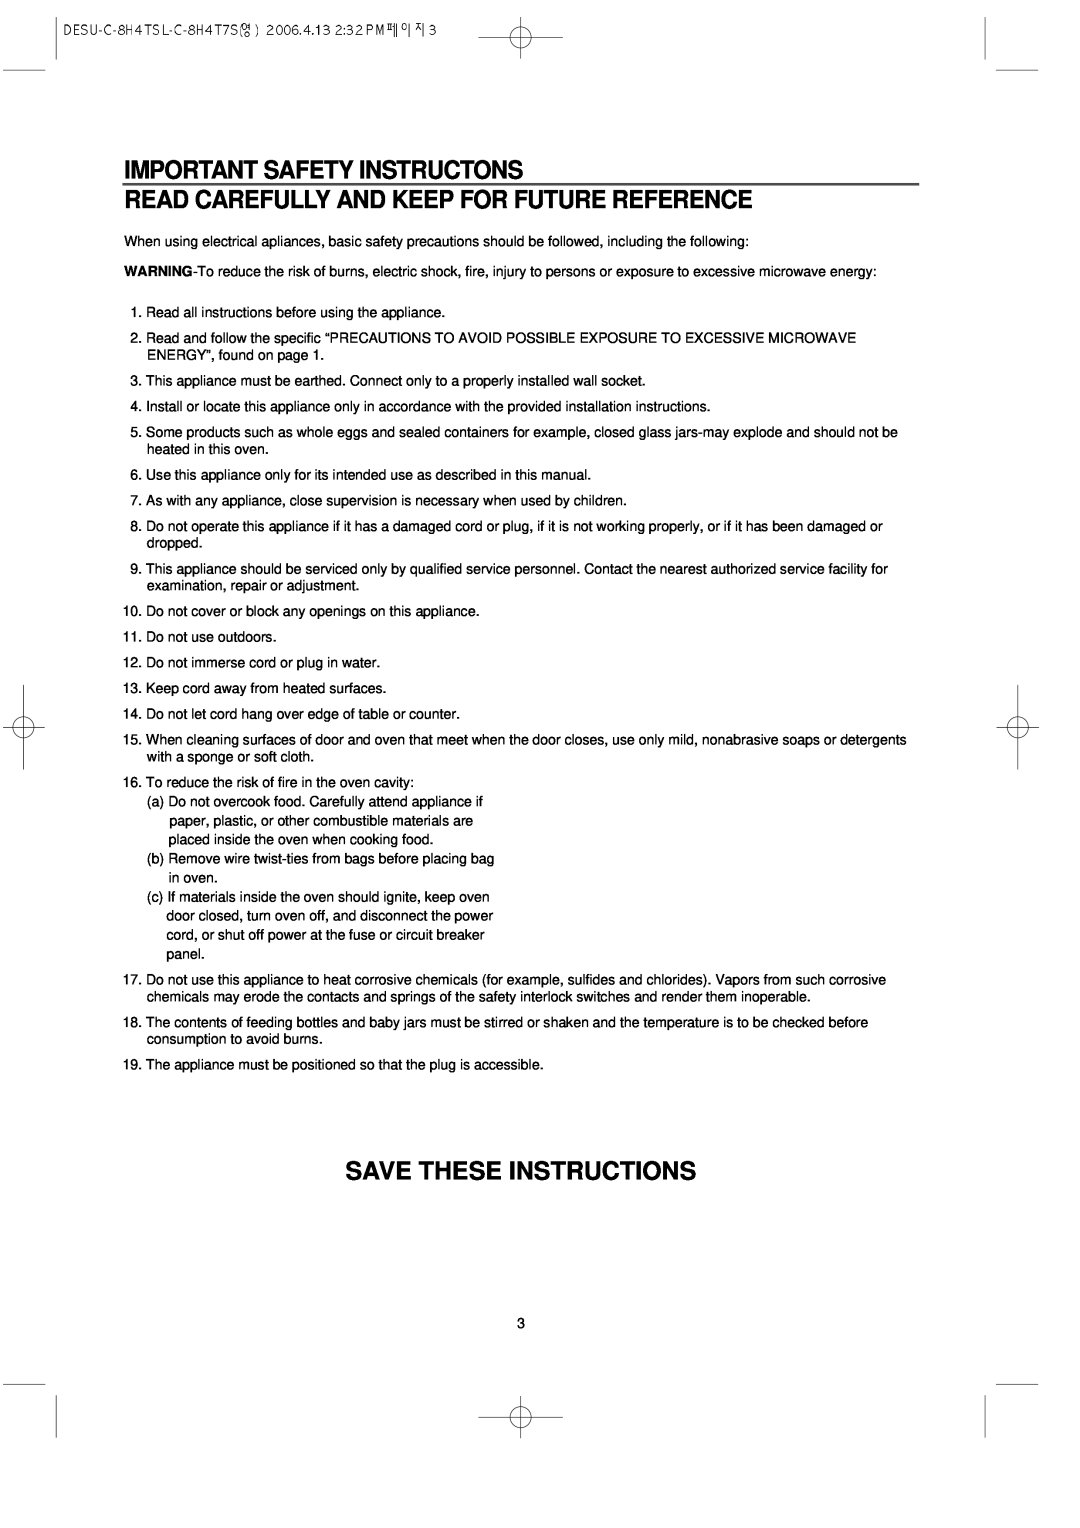 Daewoo KOC-8H4TSL Important Safety Instructons, Read Carefully And Keep For Future Reference, Save These Instructions 